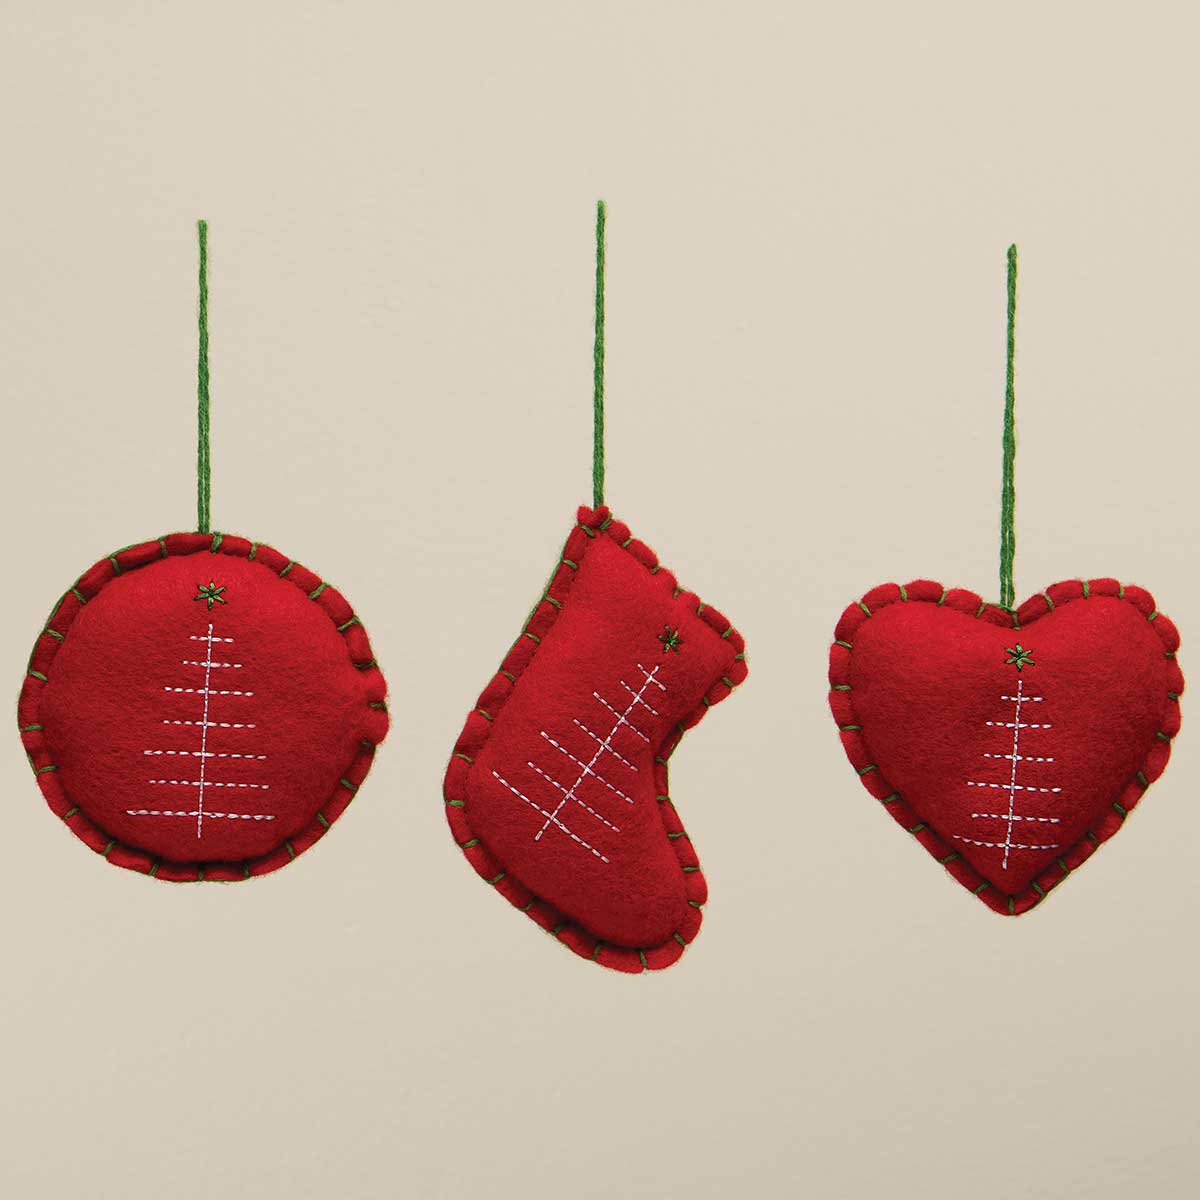 b50 ORNAMENT PLUSH 3 ASSORTED 4IN X 1IN X 4IN POLYESTER